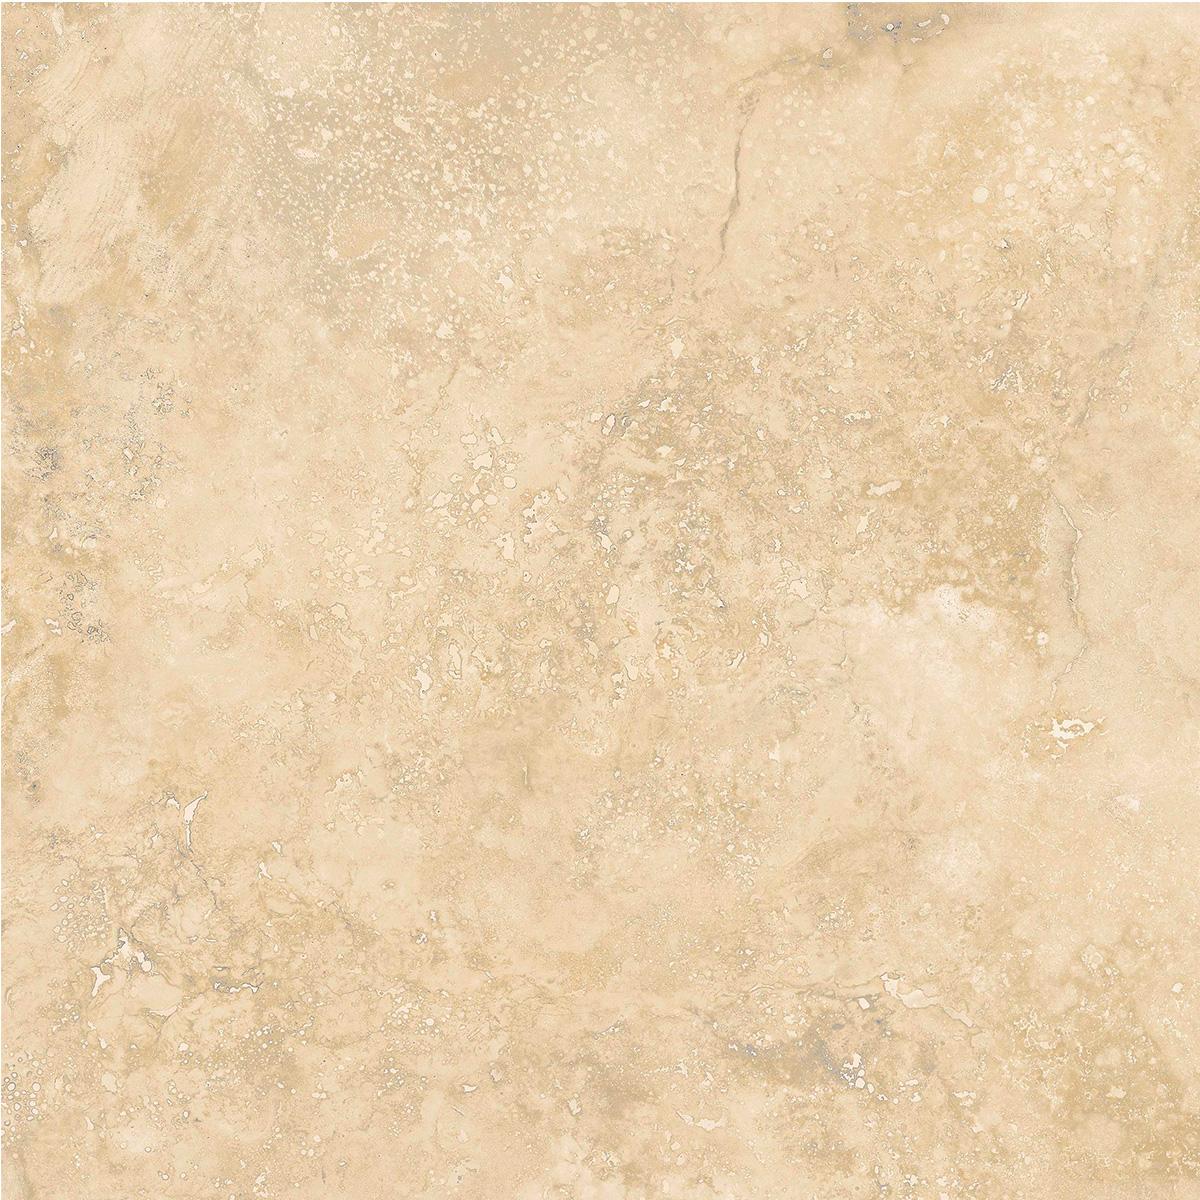 Gres Porcelánico Mineral Stone Beige Mate - 61X61 cm - 1.48 m2